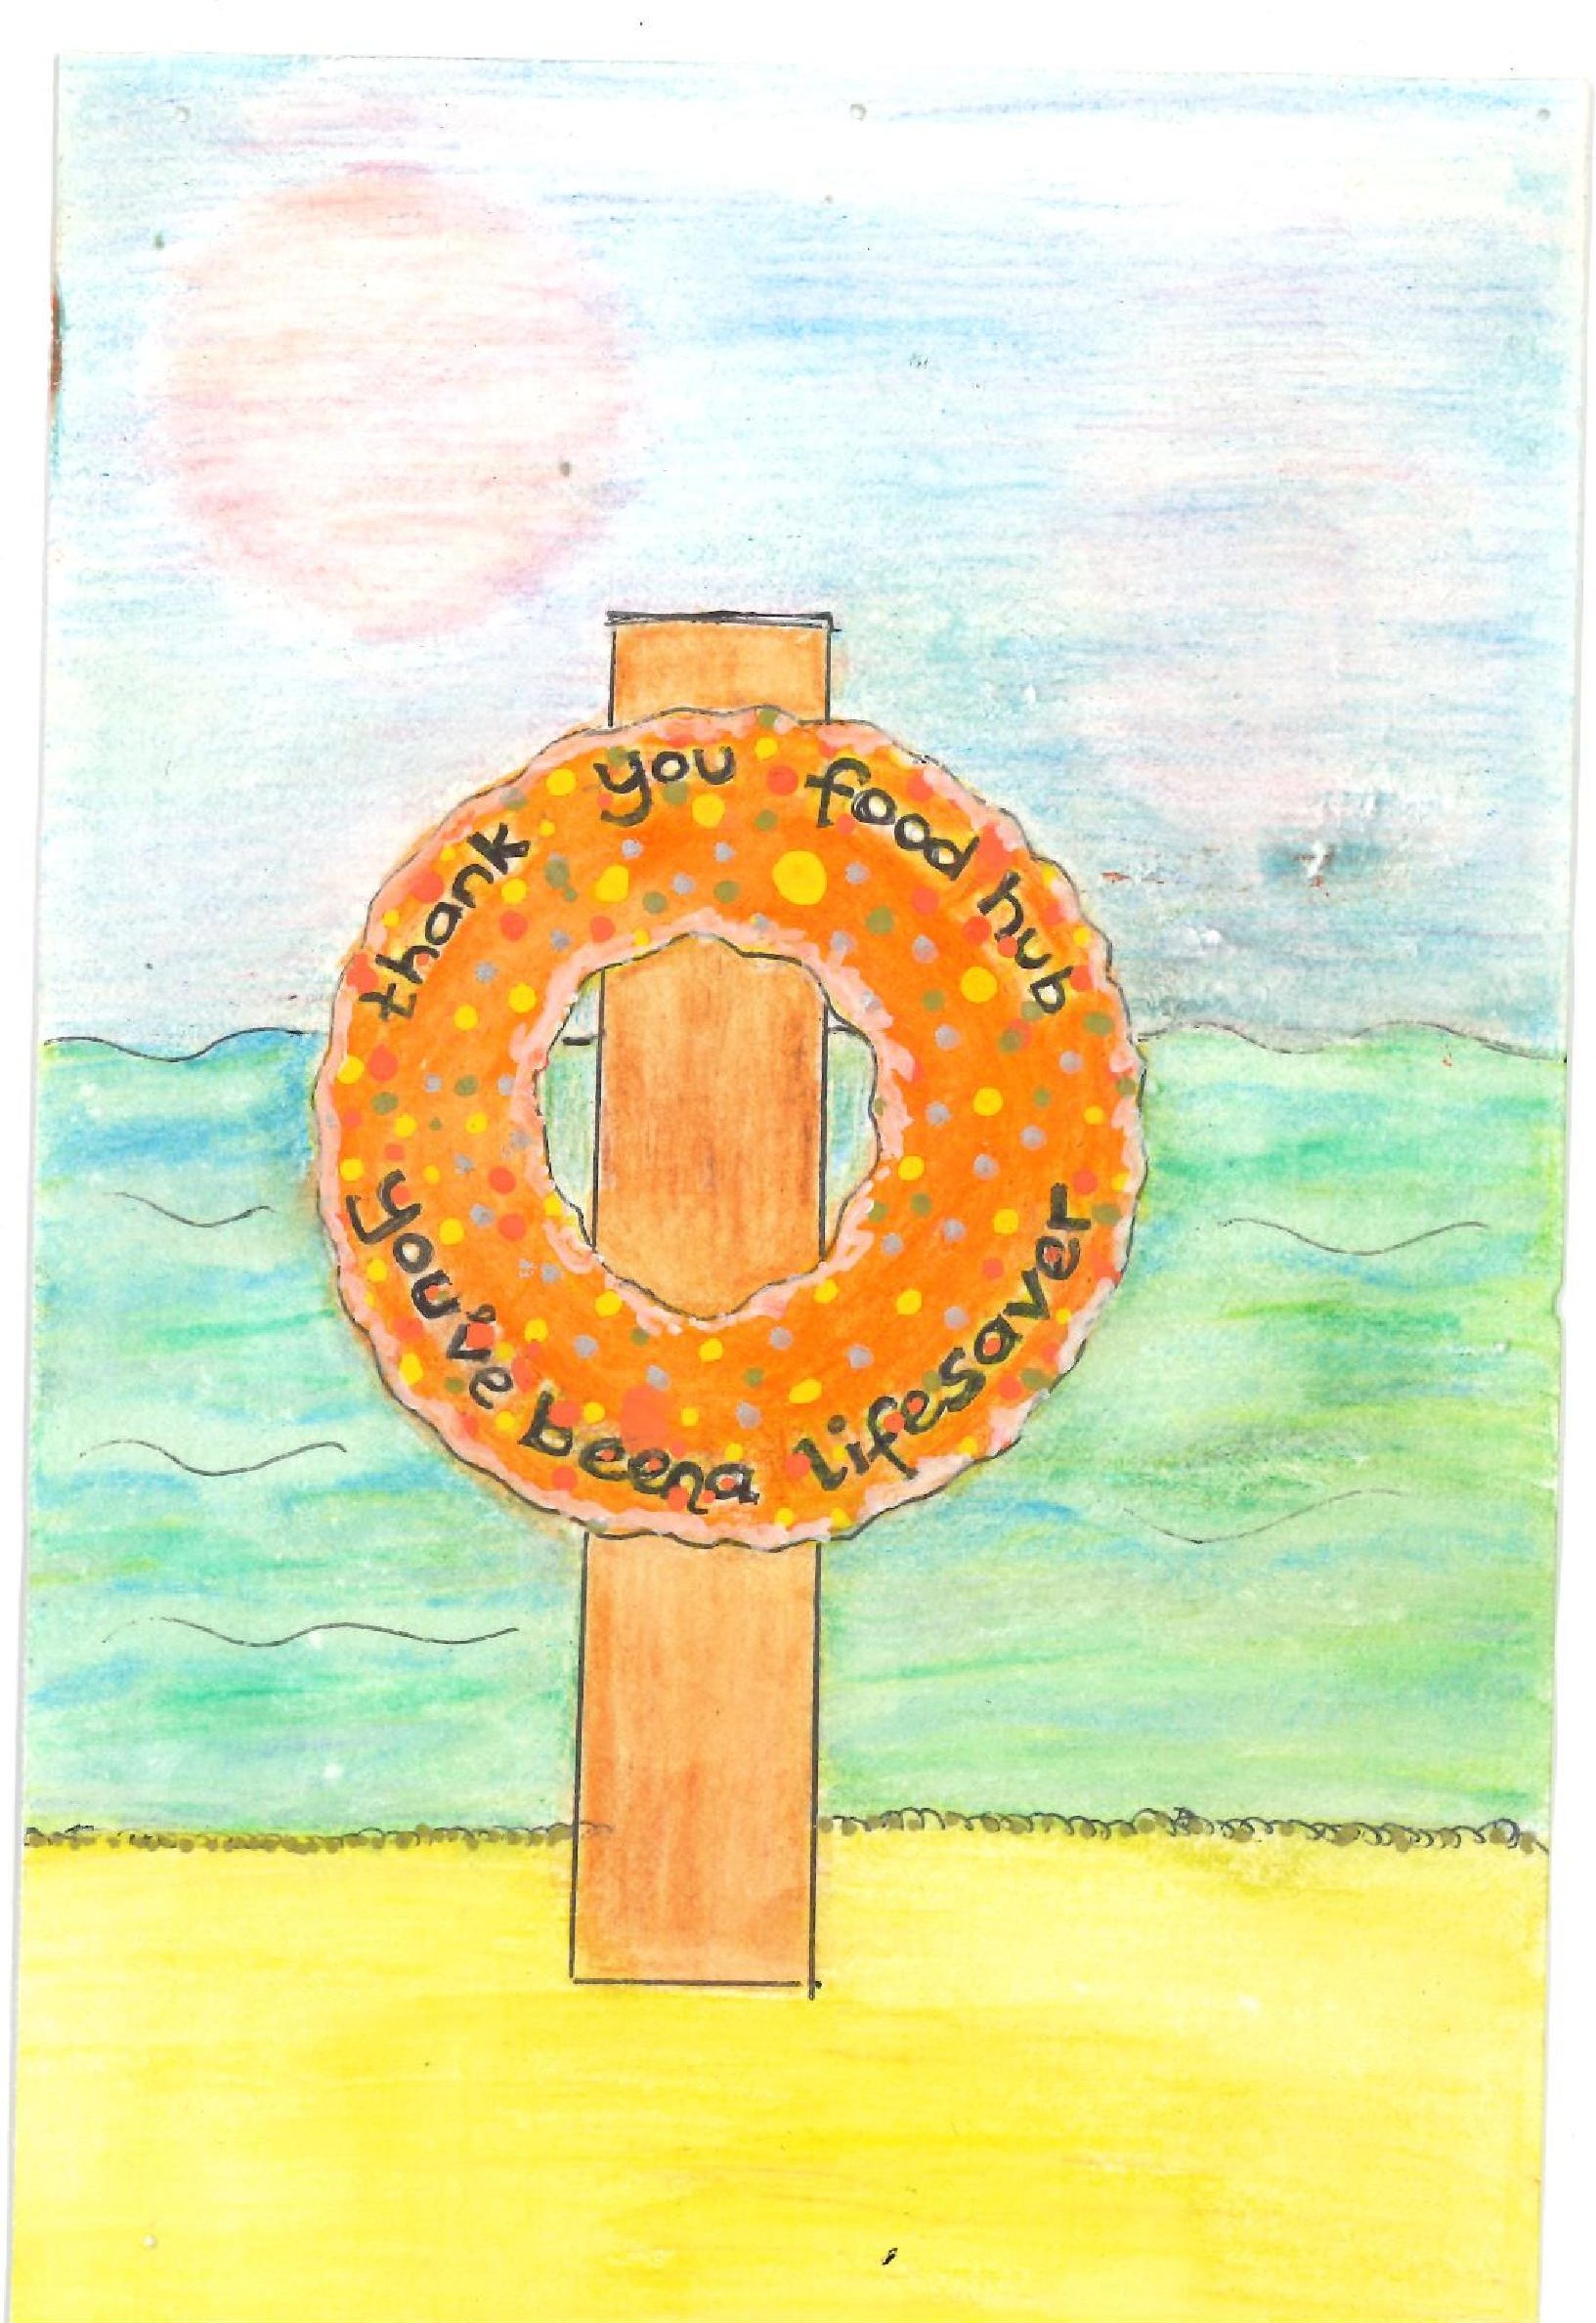 Handrawn image of a life ring next to the ocean. On the ring is written "thank you food hub, you've been a lifesaver". By leonie